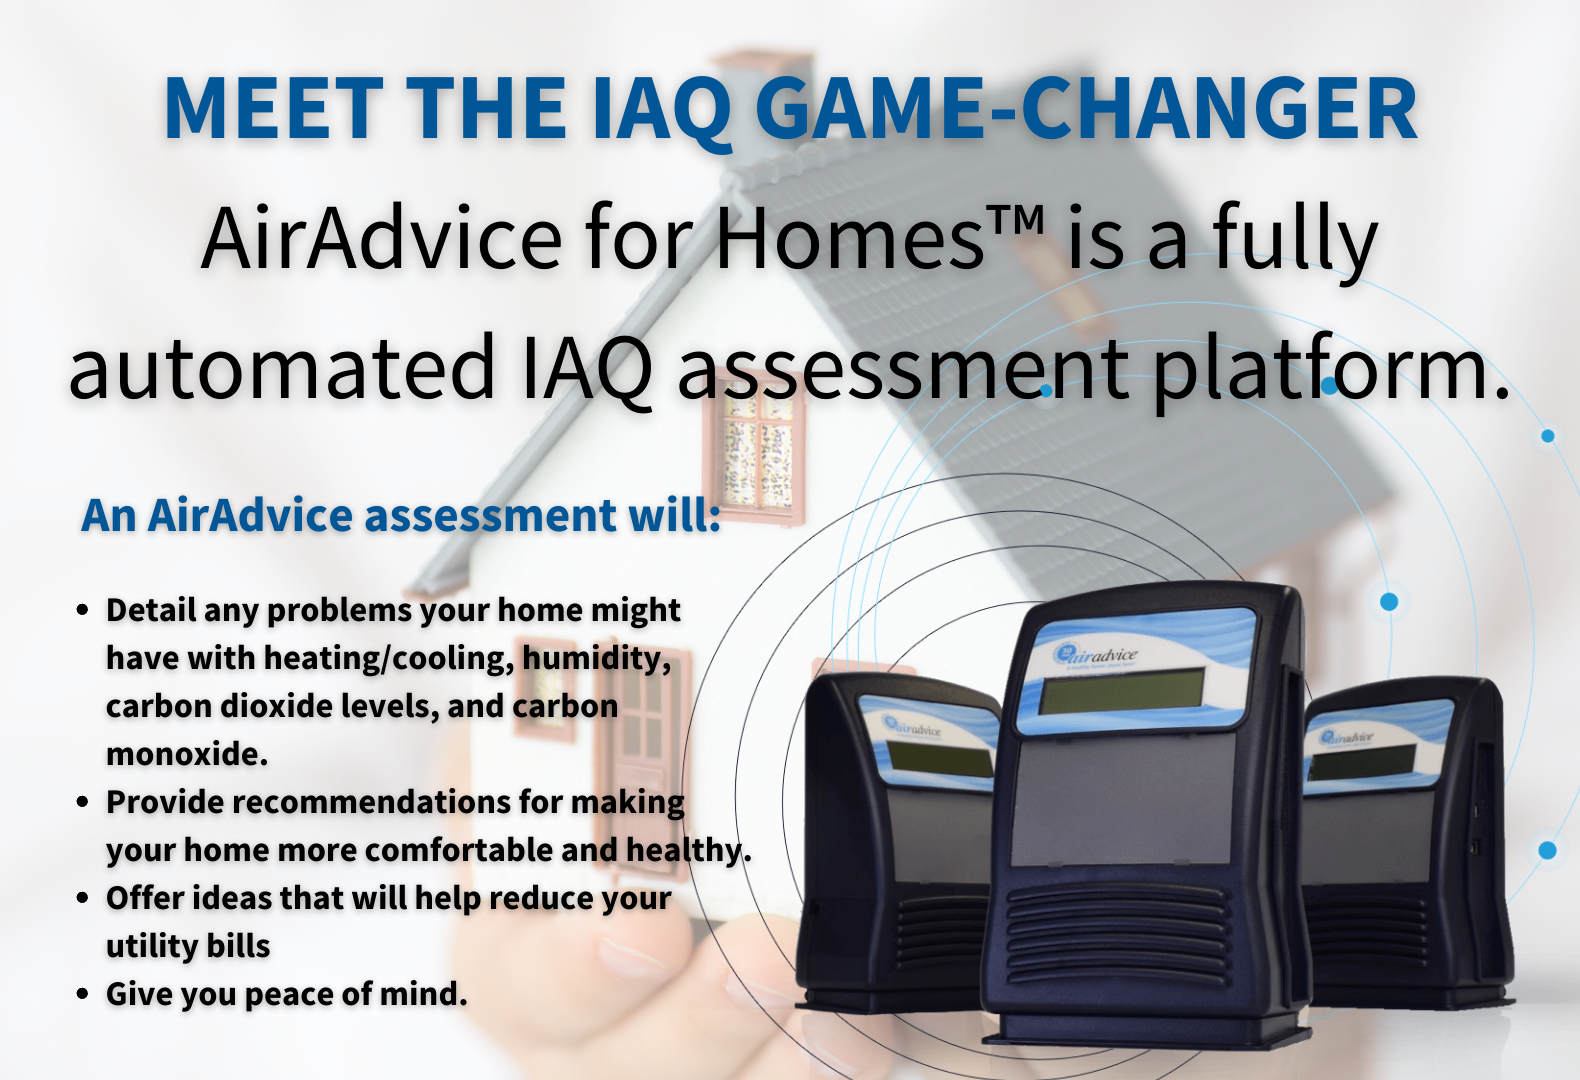 Infographic "Meet the IAQ Game-Changer": AirAdvice for Homes, a fully automated IAQ assessment platform.